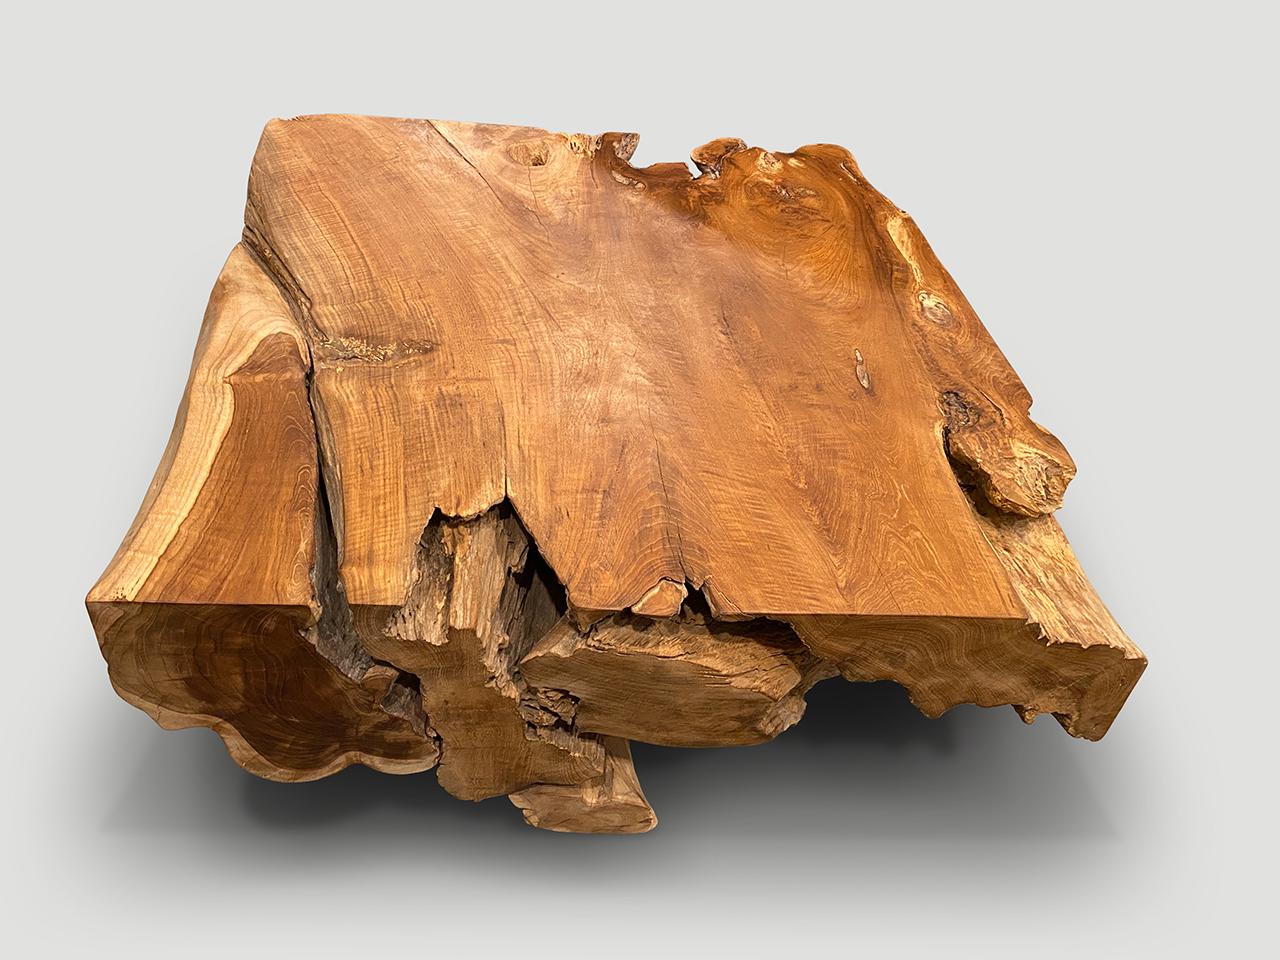 Impressive reclaimed teak root coffee table. Hand carved into this usable shape whilst respecting the natural organic wood. We polished the aged teak with a natural oil finish revealing the beautiful wood grain. Organic is the new modern. 

Own an